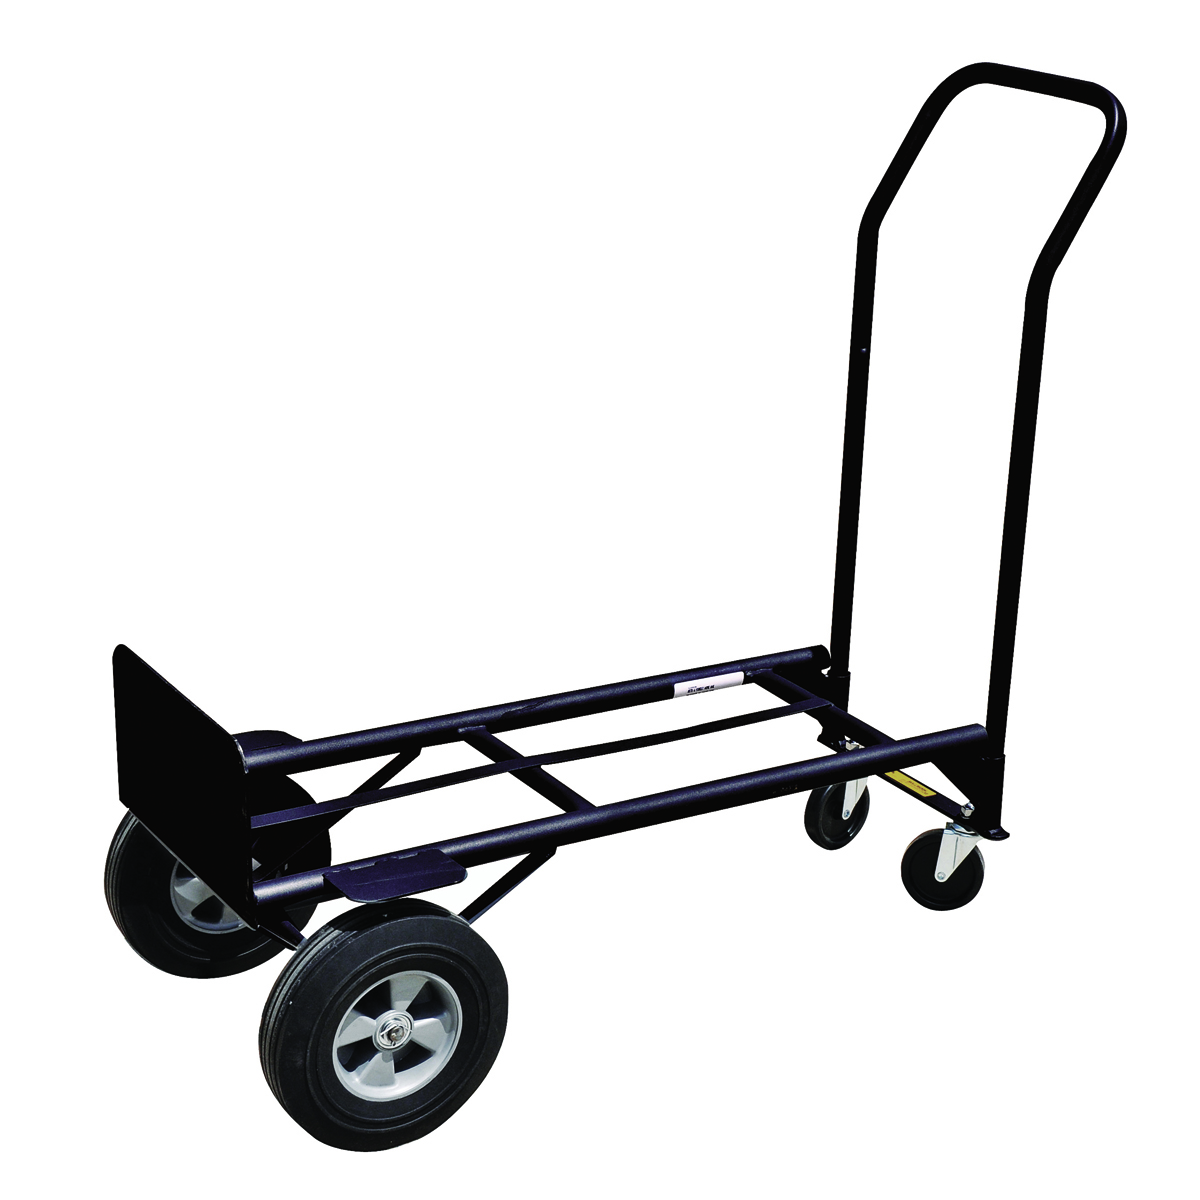 Flow back convertible hand truck 800 lb capacity with 10" puncture proof tires - image 2 of 2